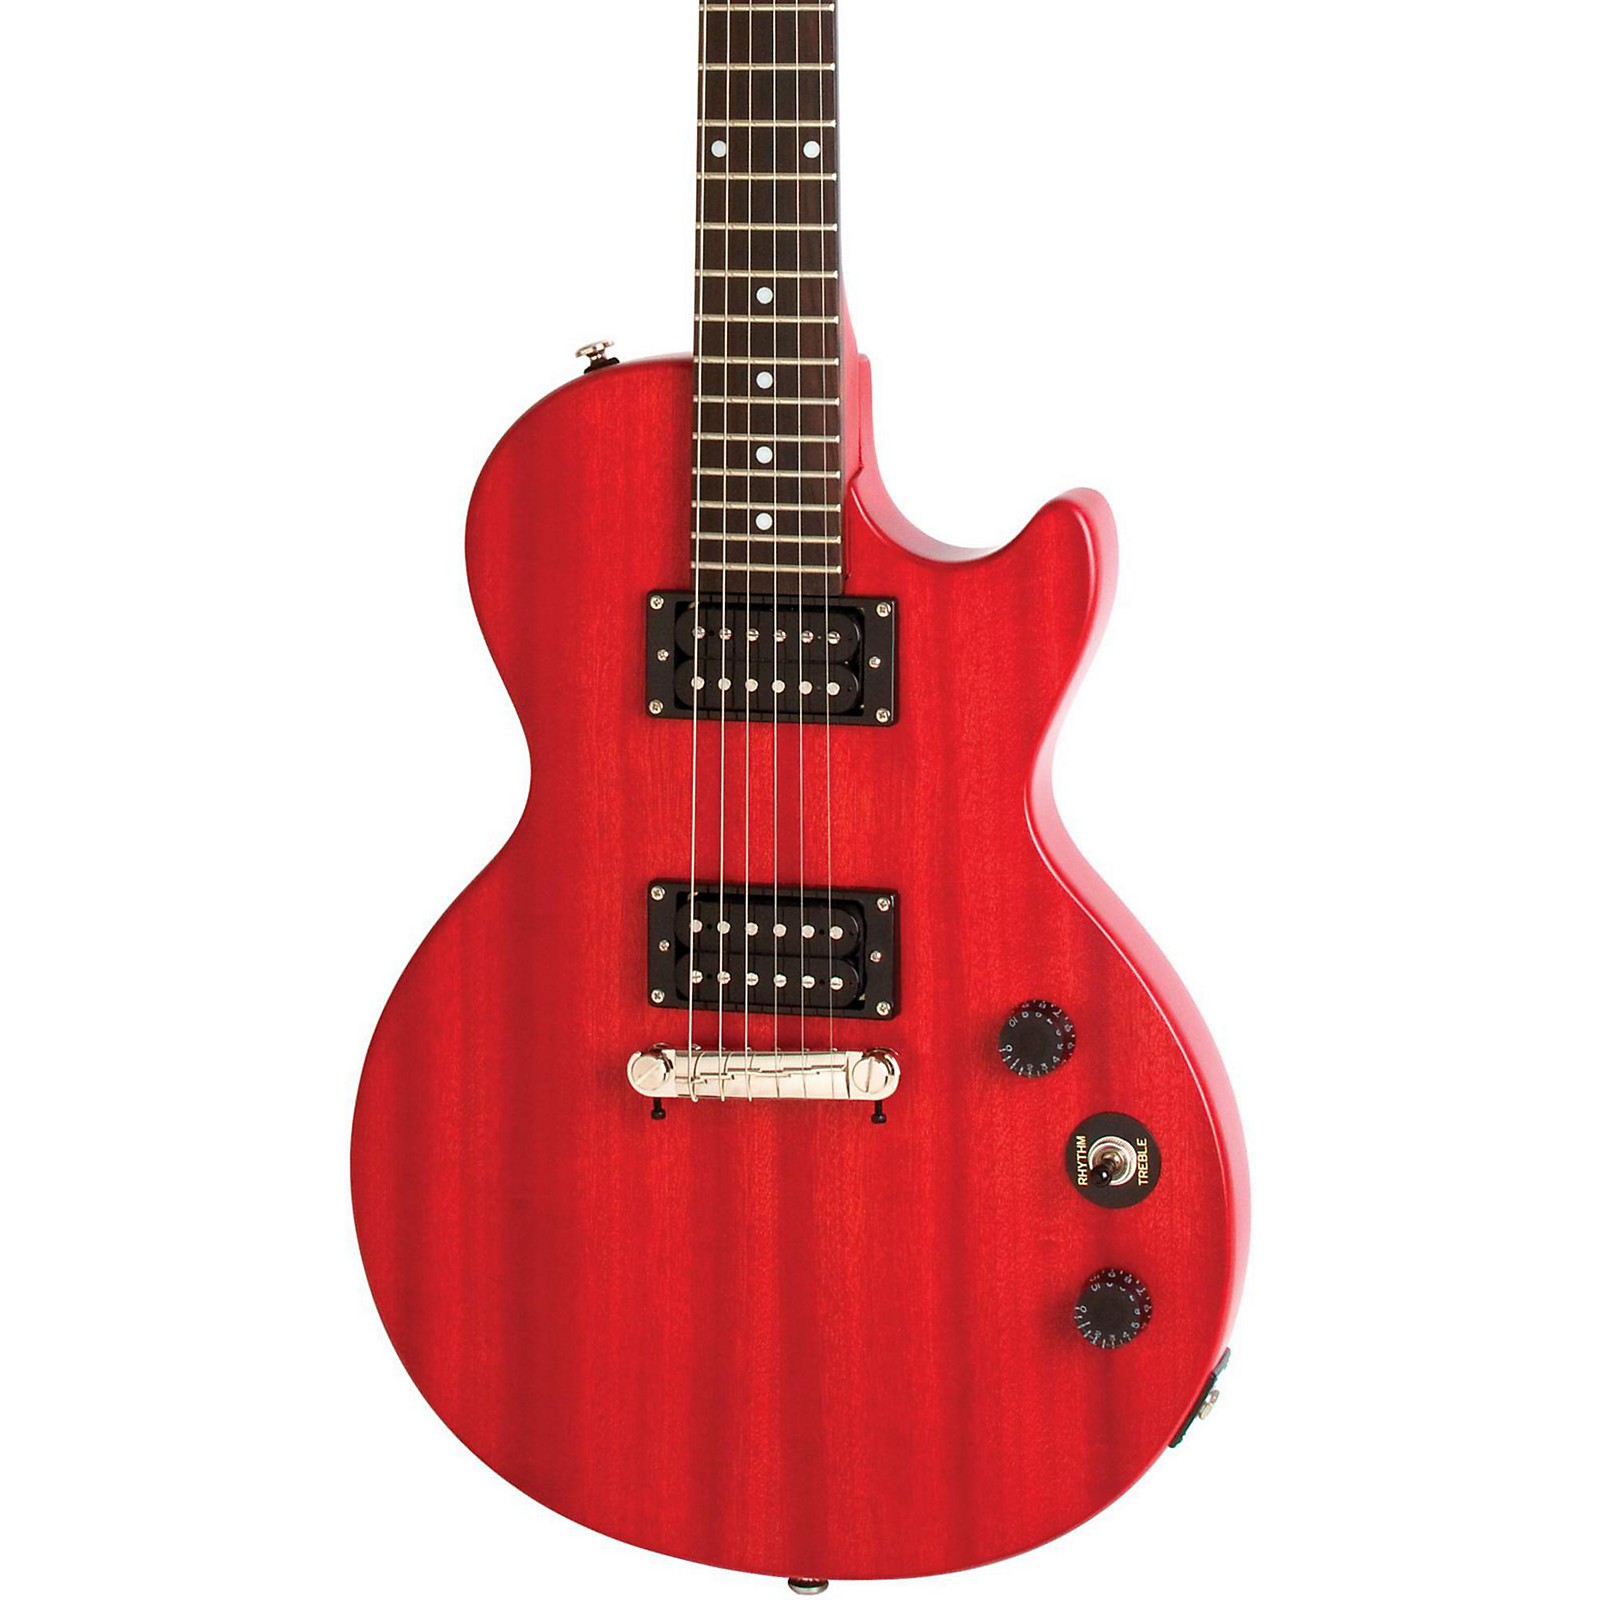 Epiphone Les Paul Special-I Limited-Edition Electric Guitar Worn Cherry  Guitar Center